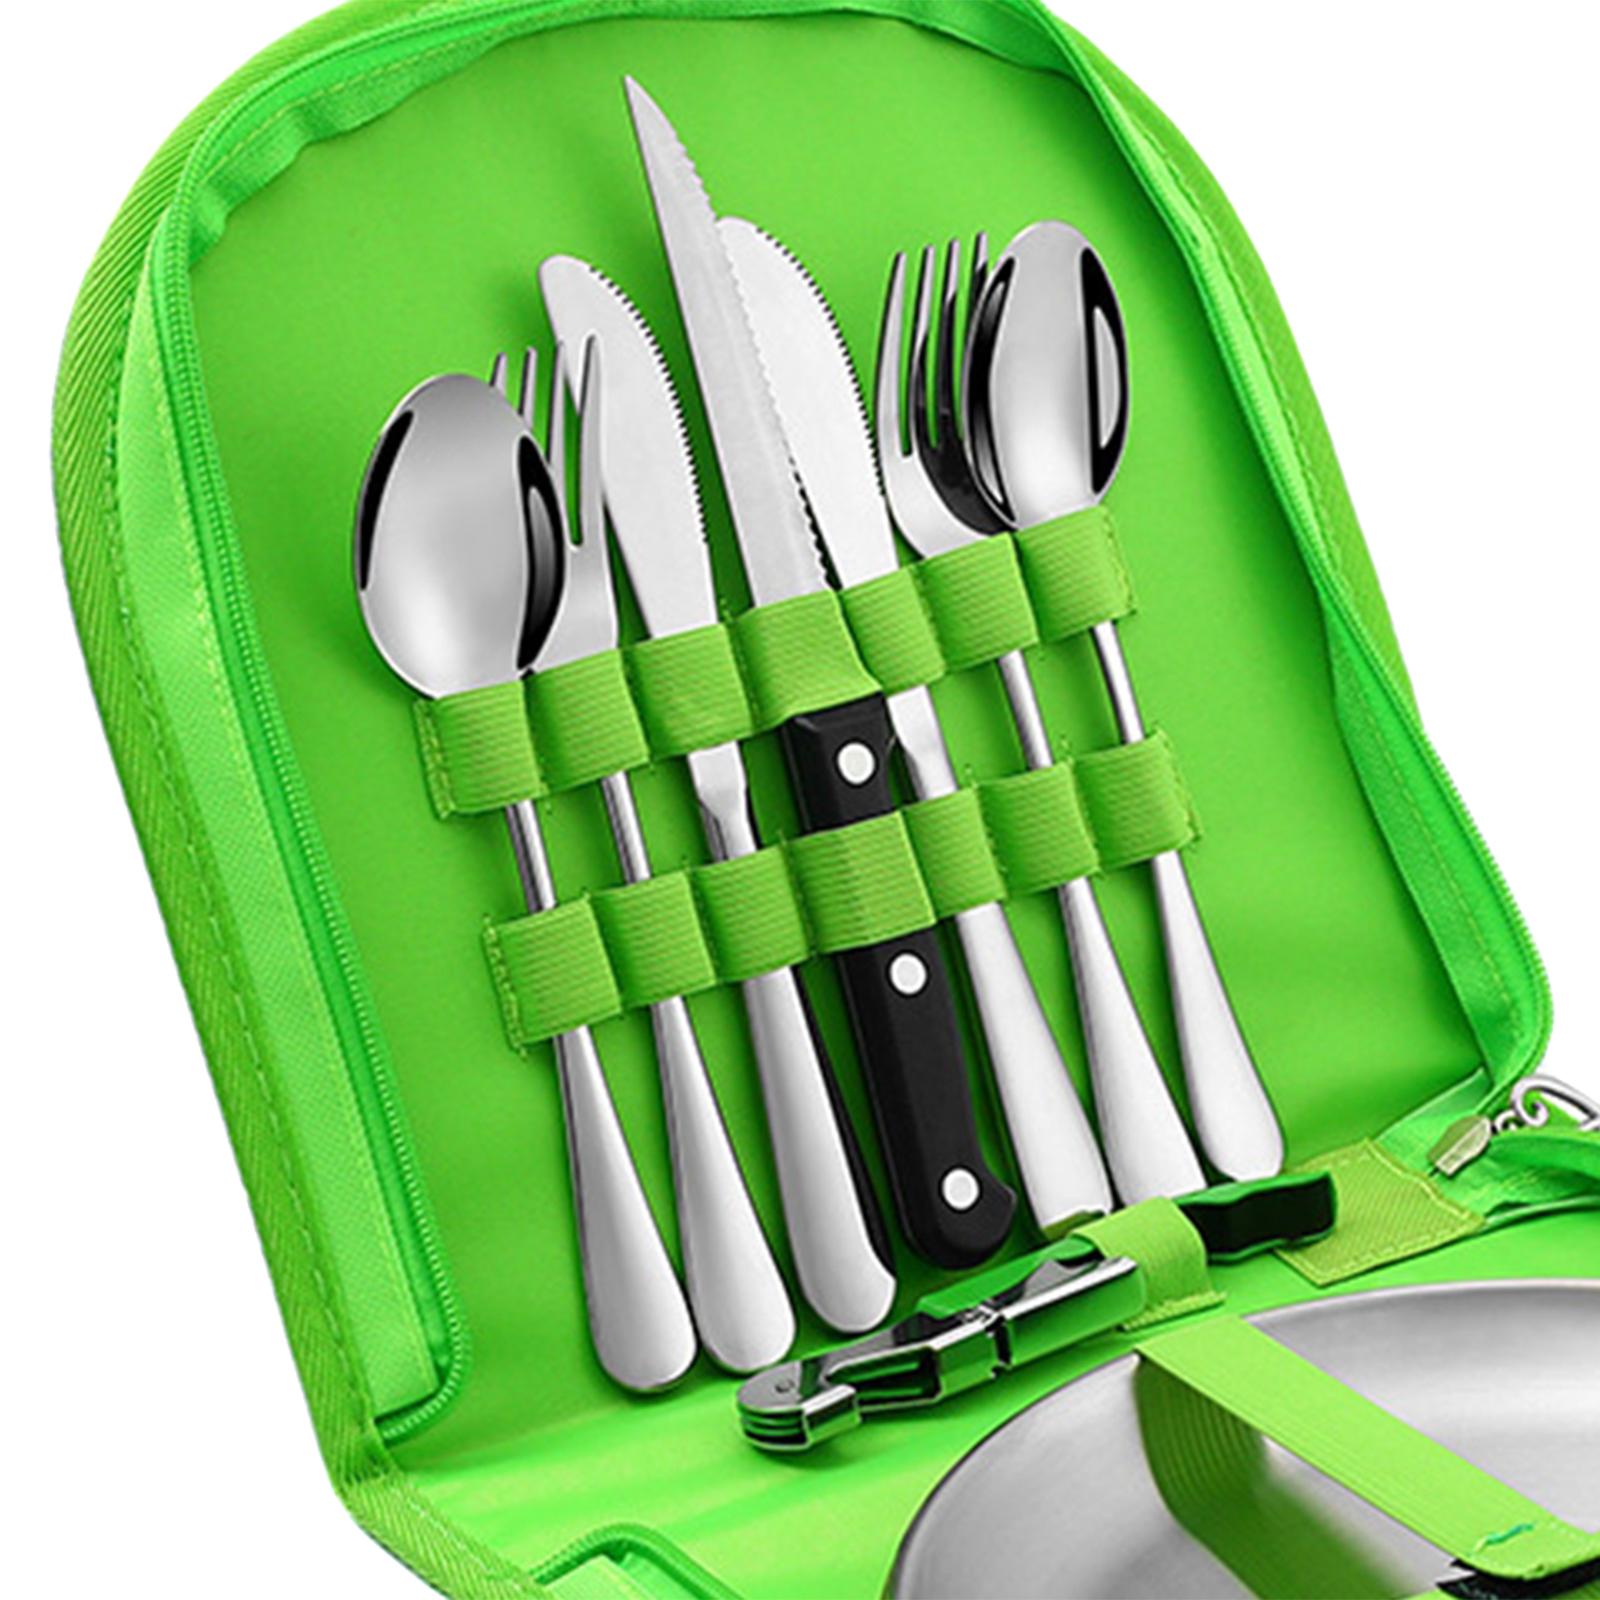 10 Pieces Picnic Family Cutlery Set with Travel Case for Barbecue Hiking Green